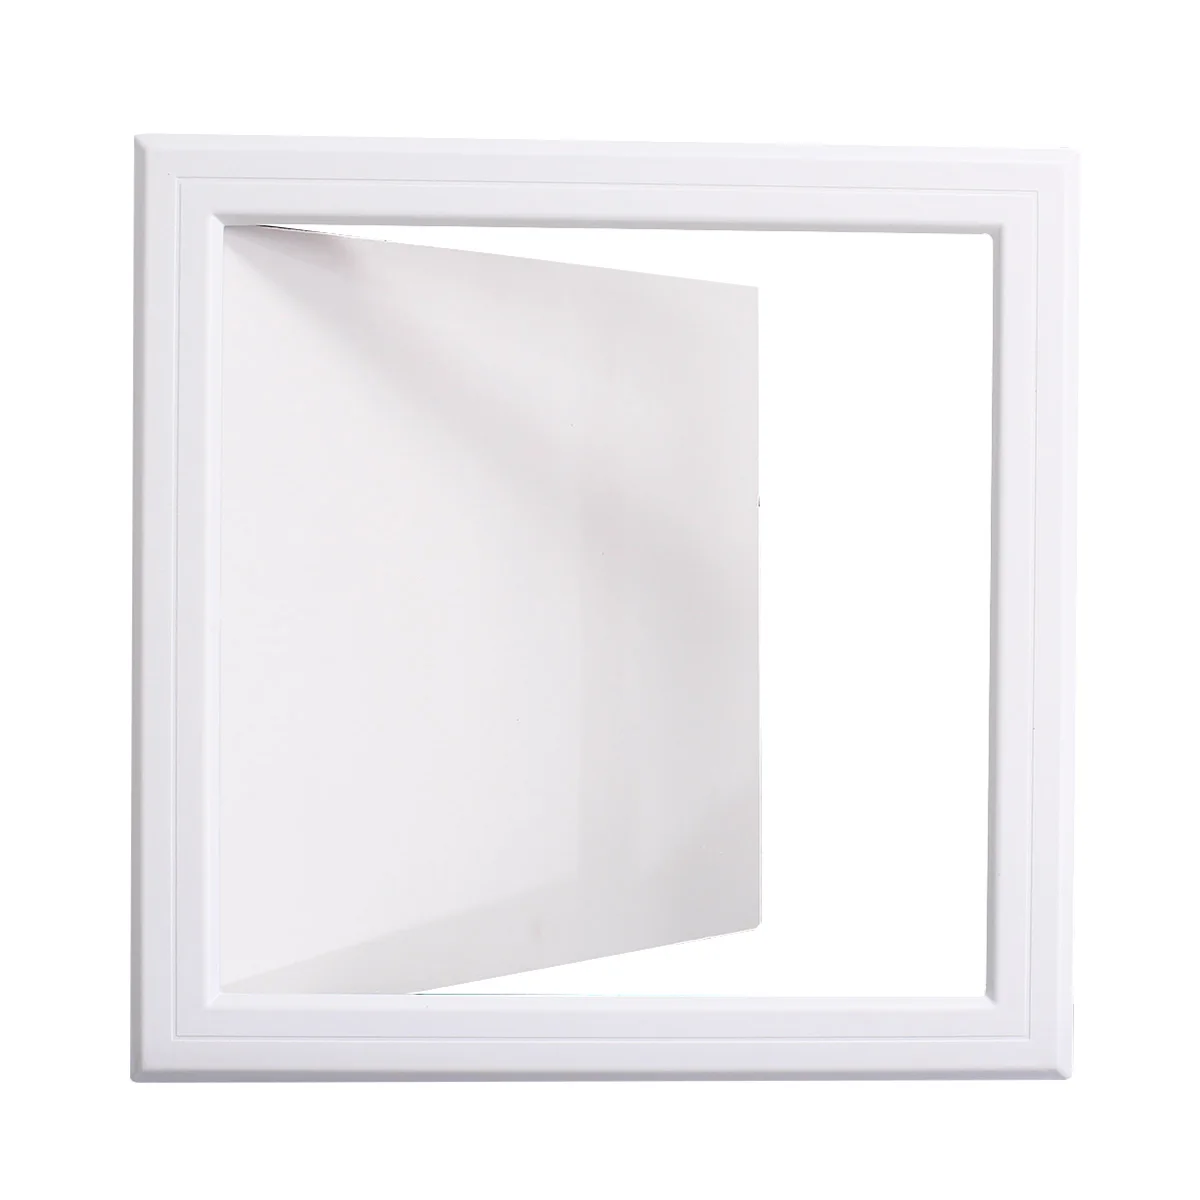 

White 400x400 ABS Wall Ceiling Access Panel Inspection Plumbing Wiring Door Revision Hatch Cover